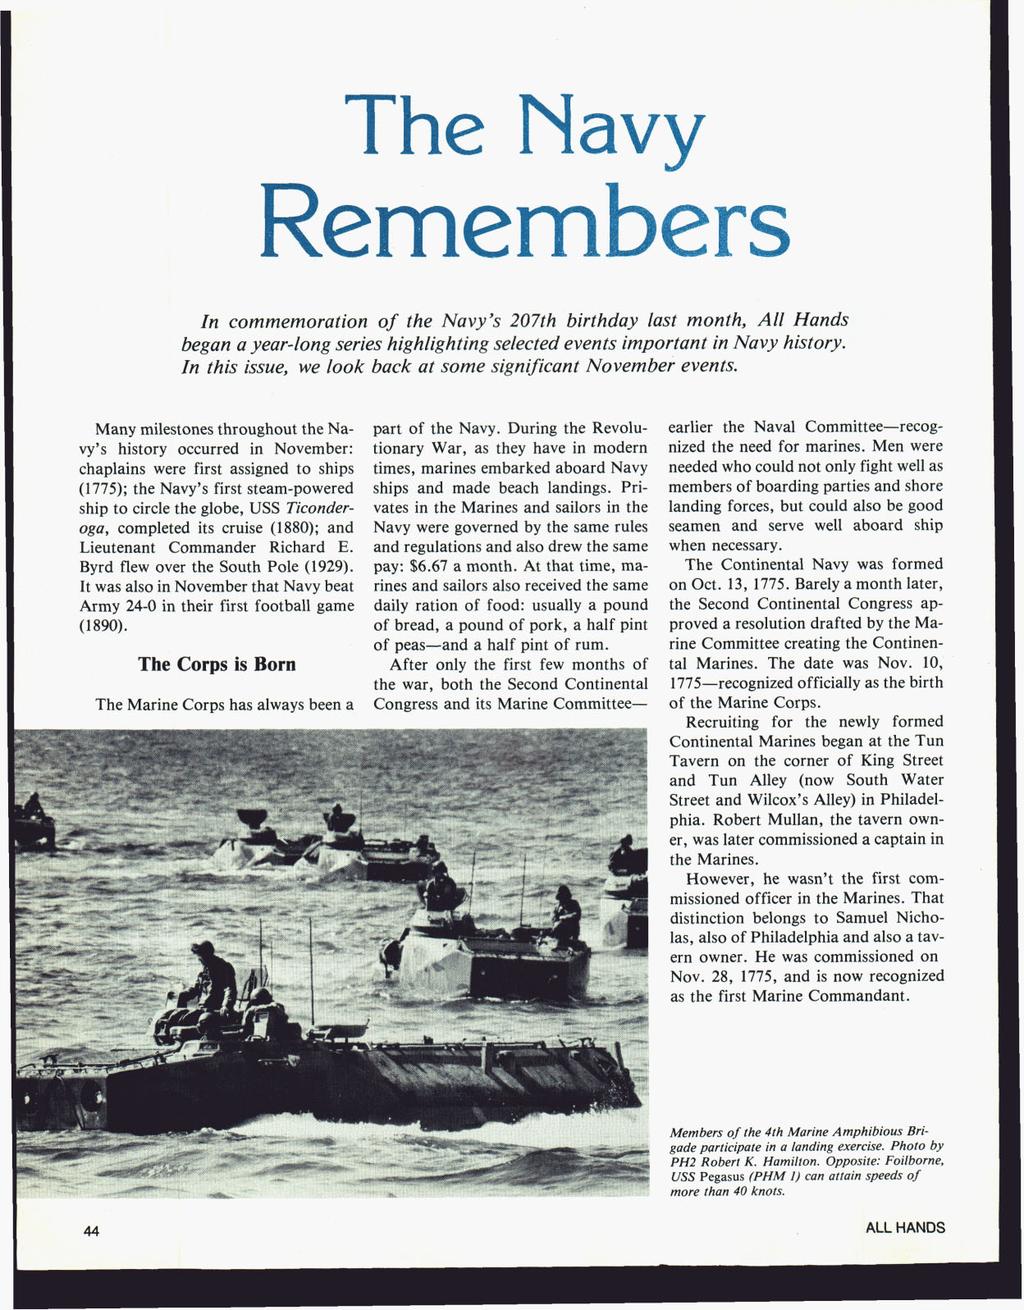 The Navy Remembers In commemoration of the Navy's 207th birthday last month, All Hands began a year-long series highlighting selected events important in Navy history.